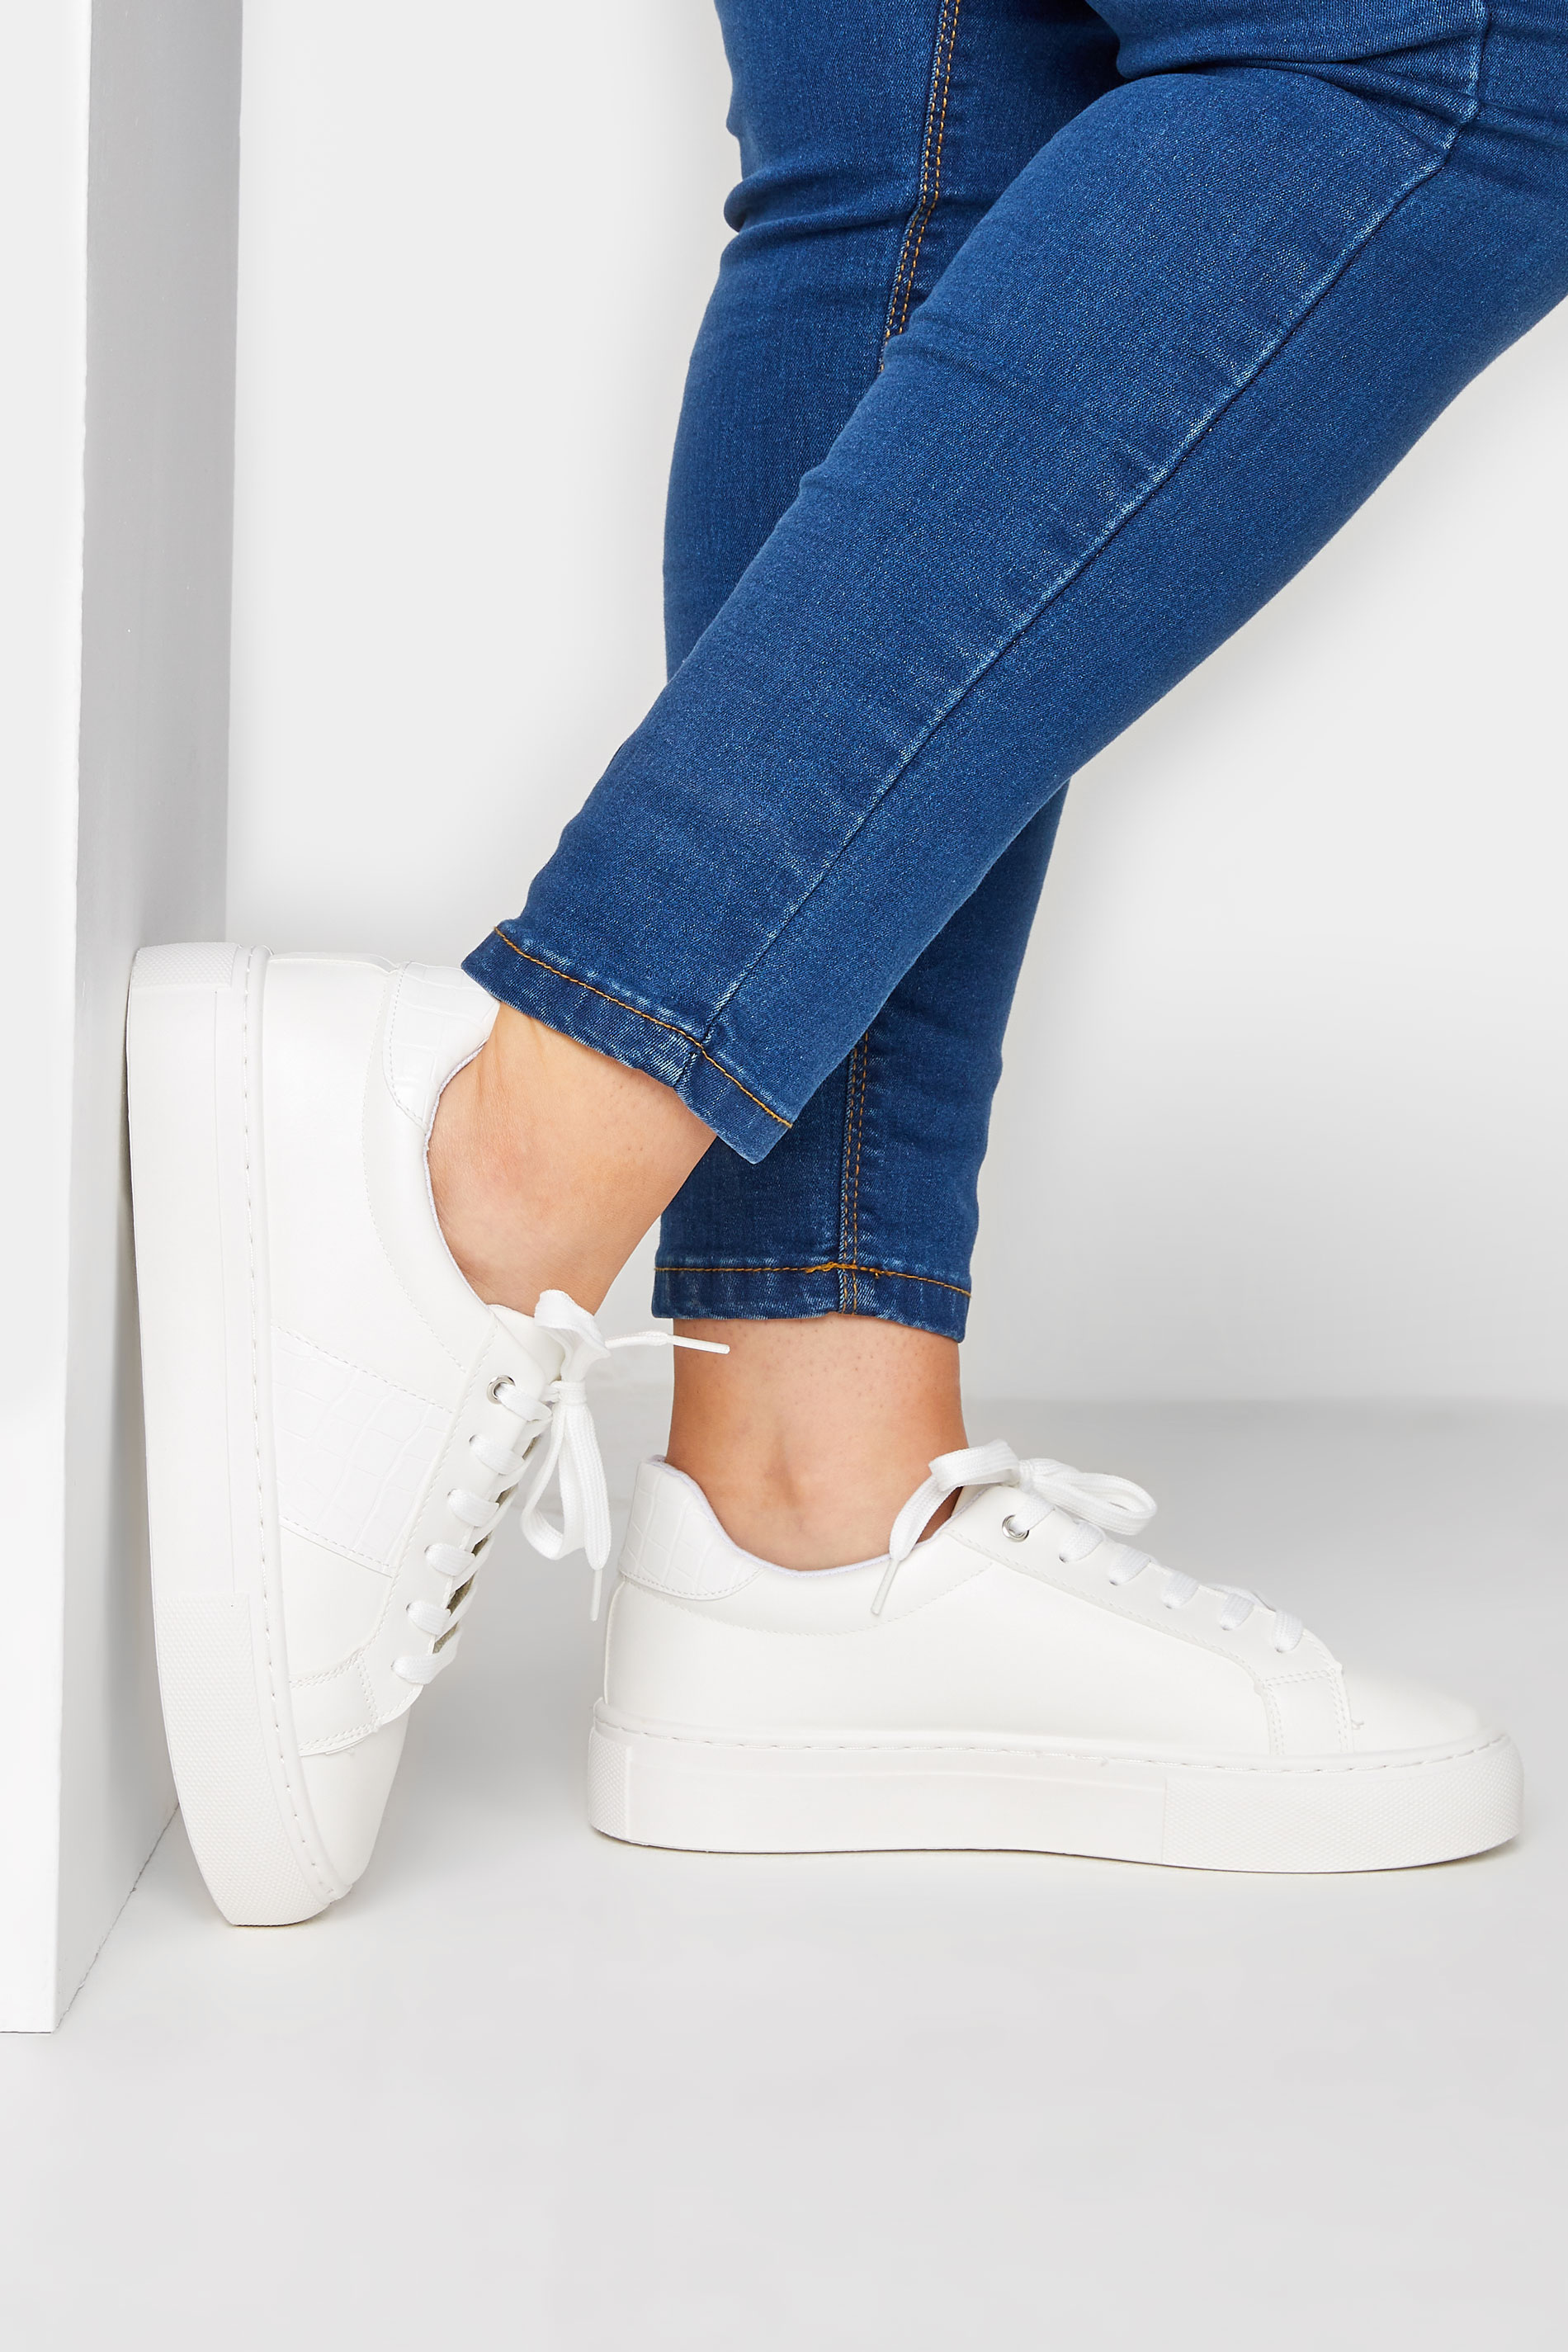 White Stripe Platform Trainers In Extra Wide EEE Fit | Yours Clothing 1